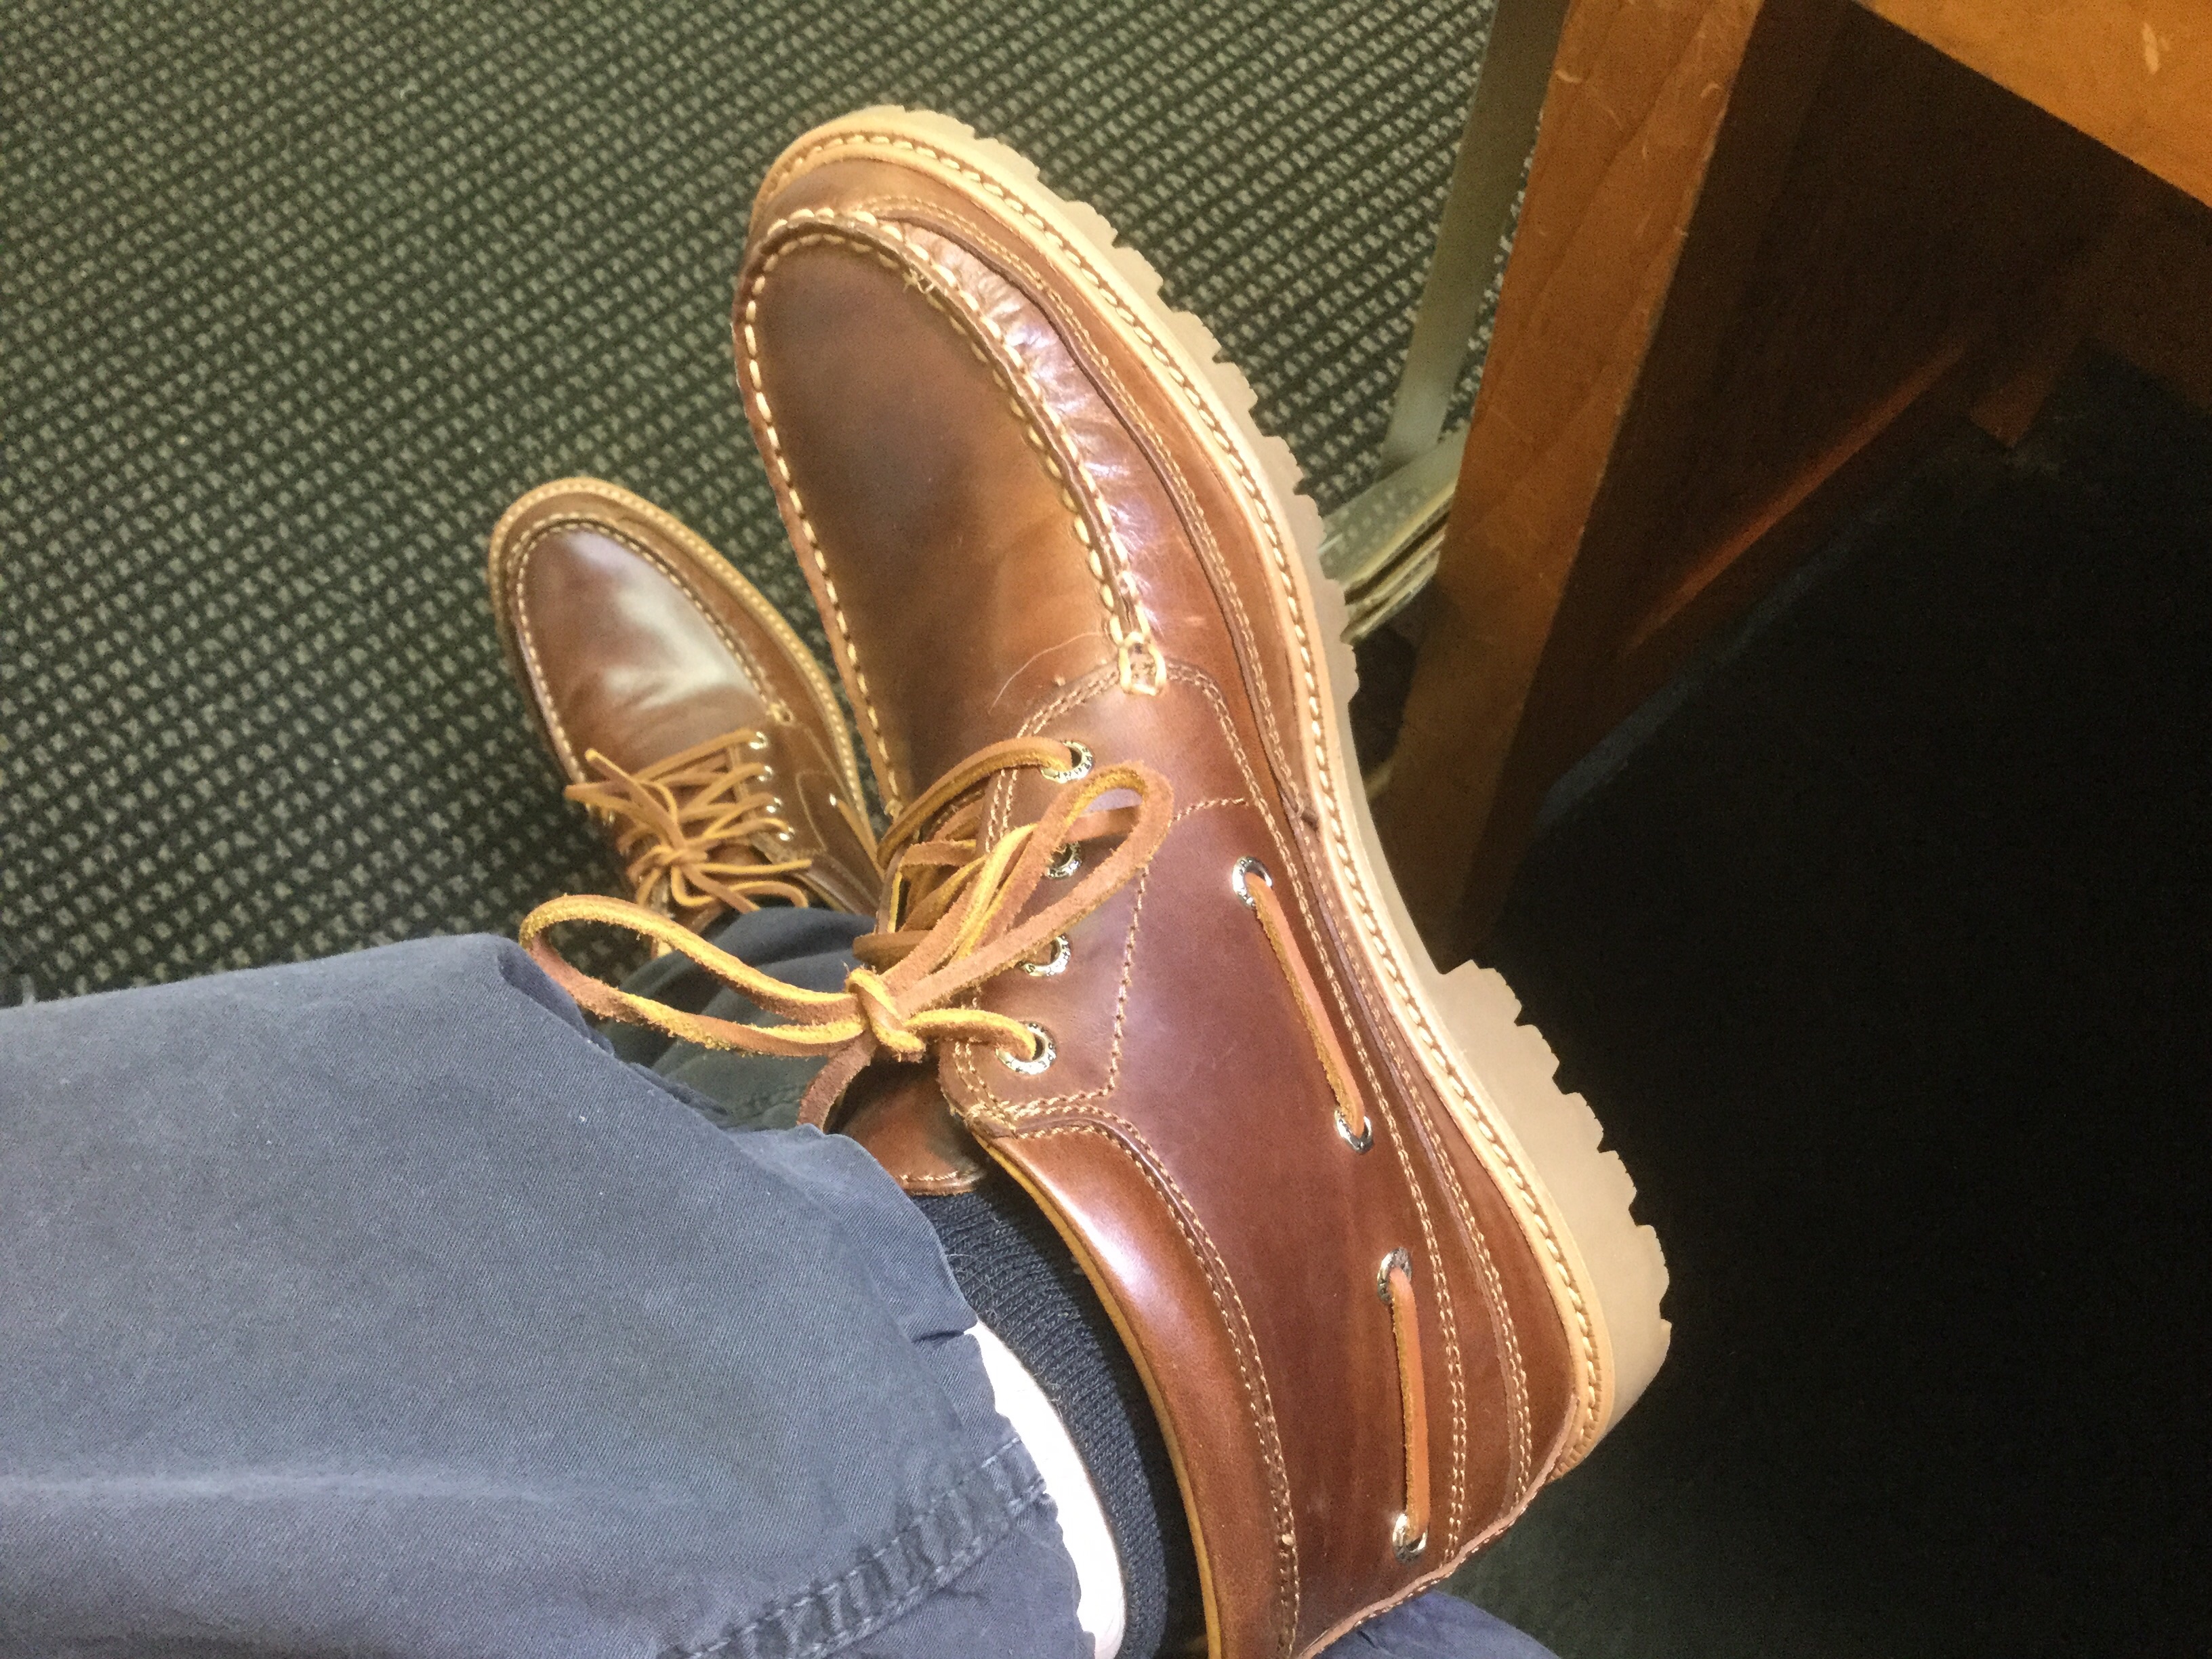 sperry leather chukka boots